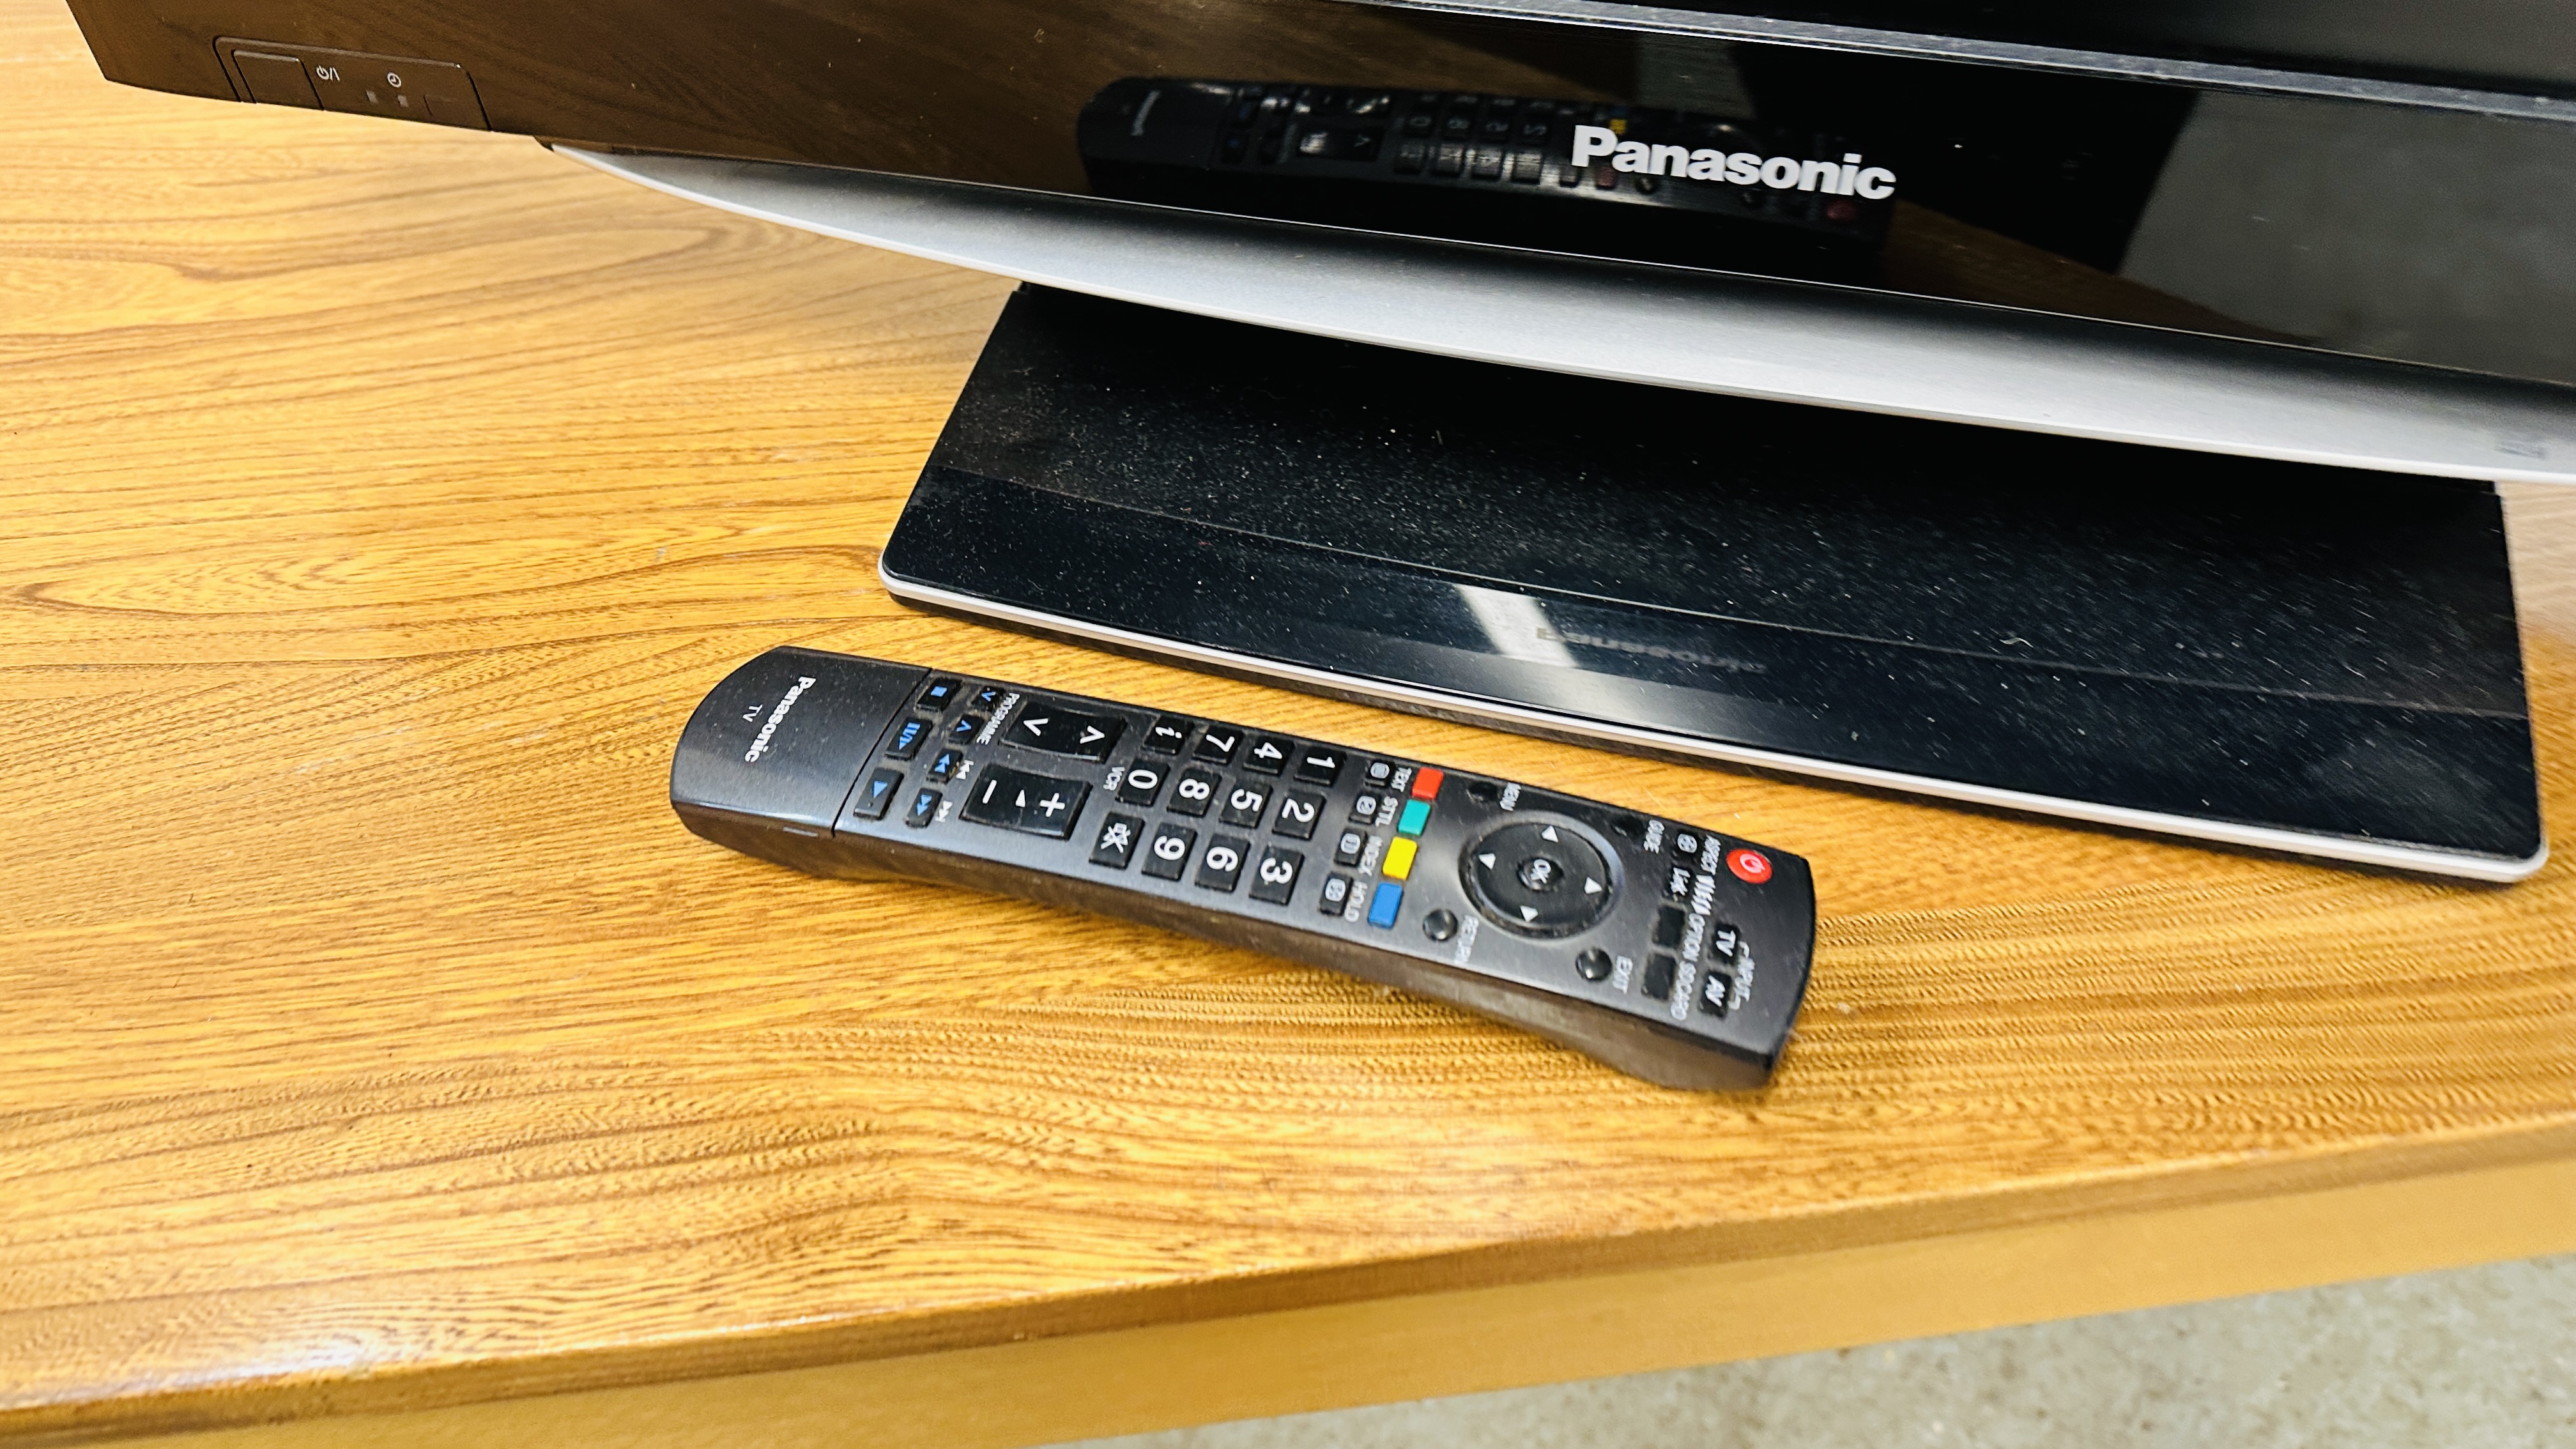 PANASONIC VIERA 32" TV WITH REMOTE - SOLD AS SEEN. - Image 2 of 3